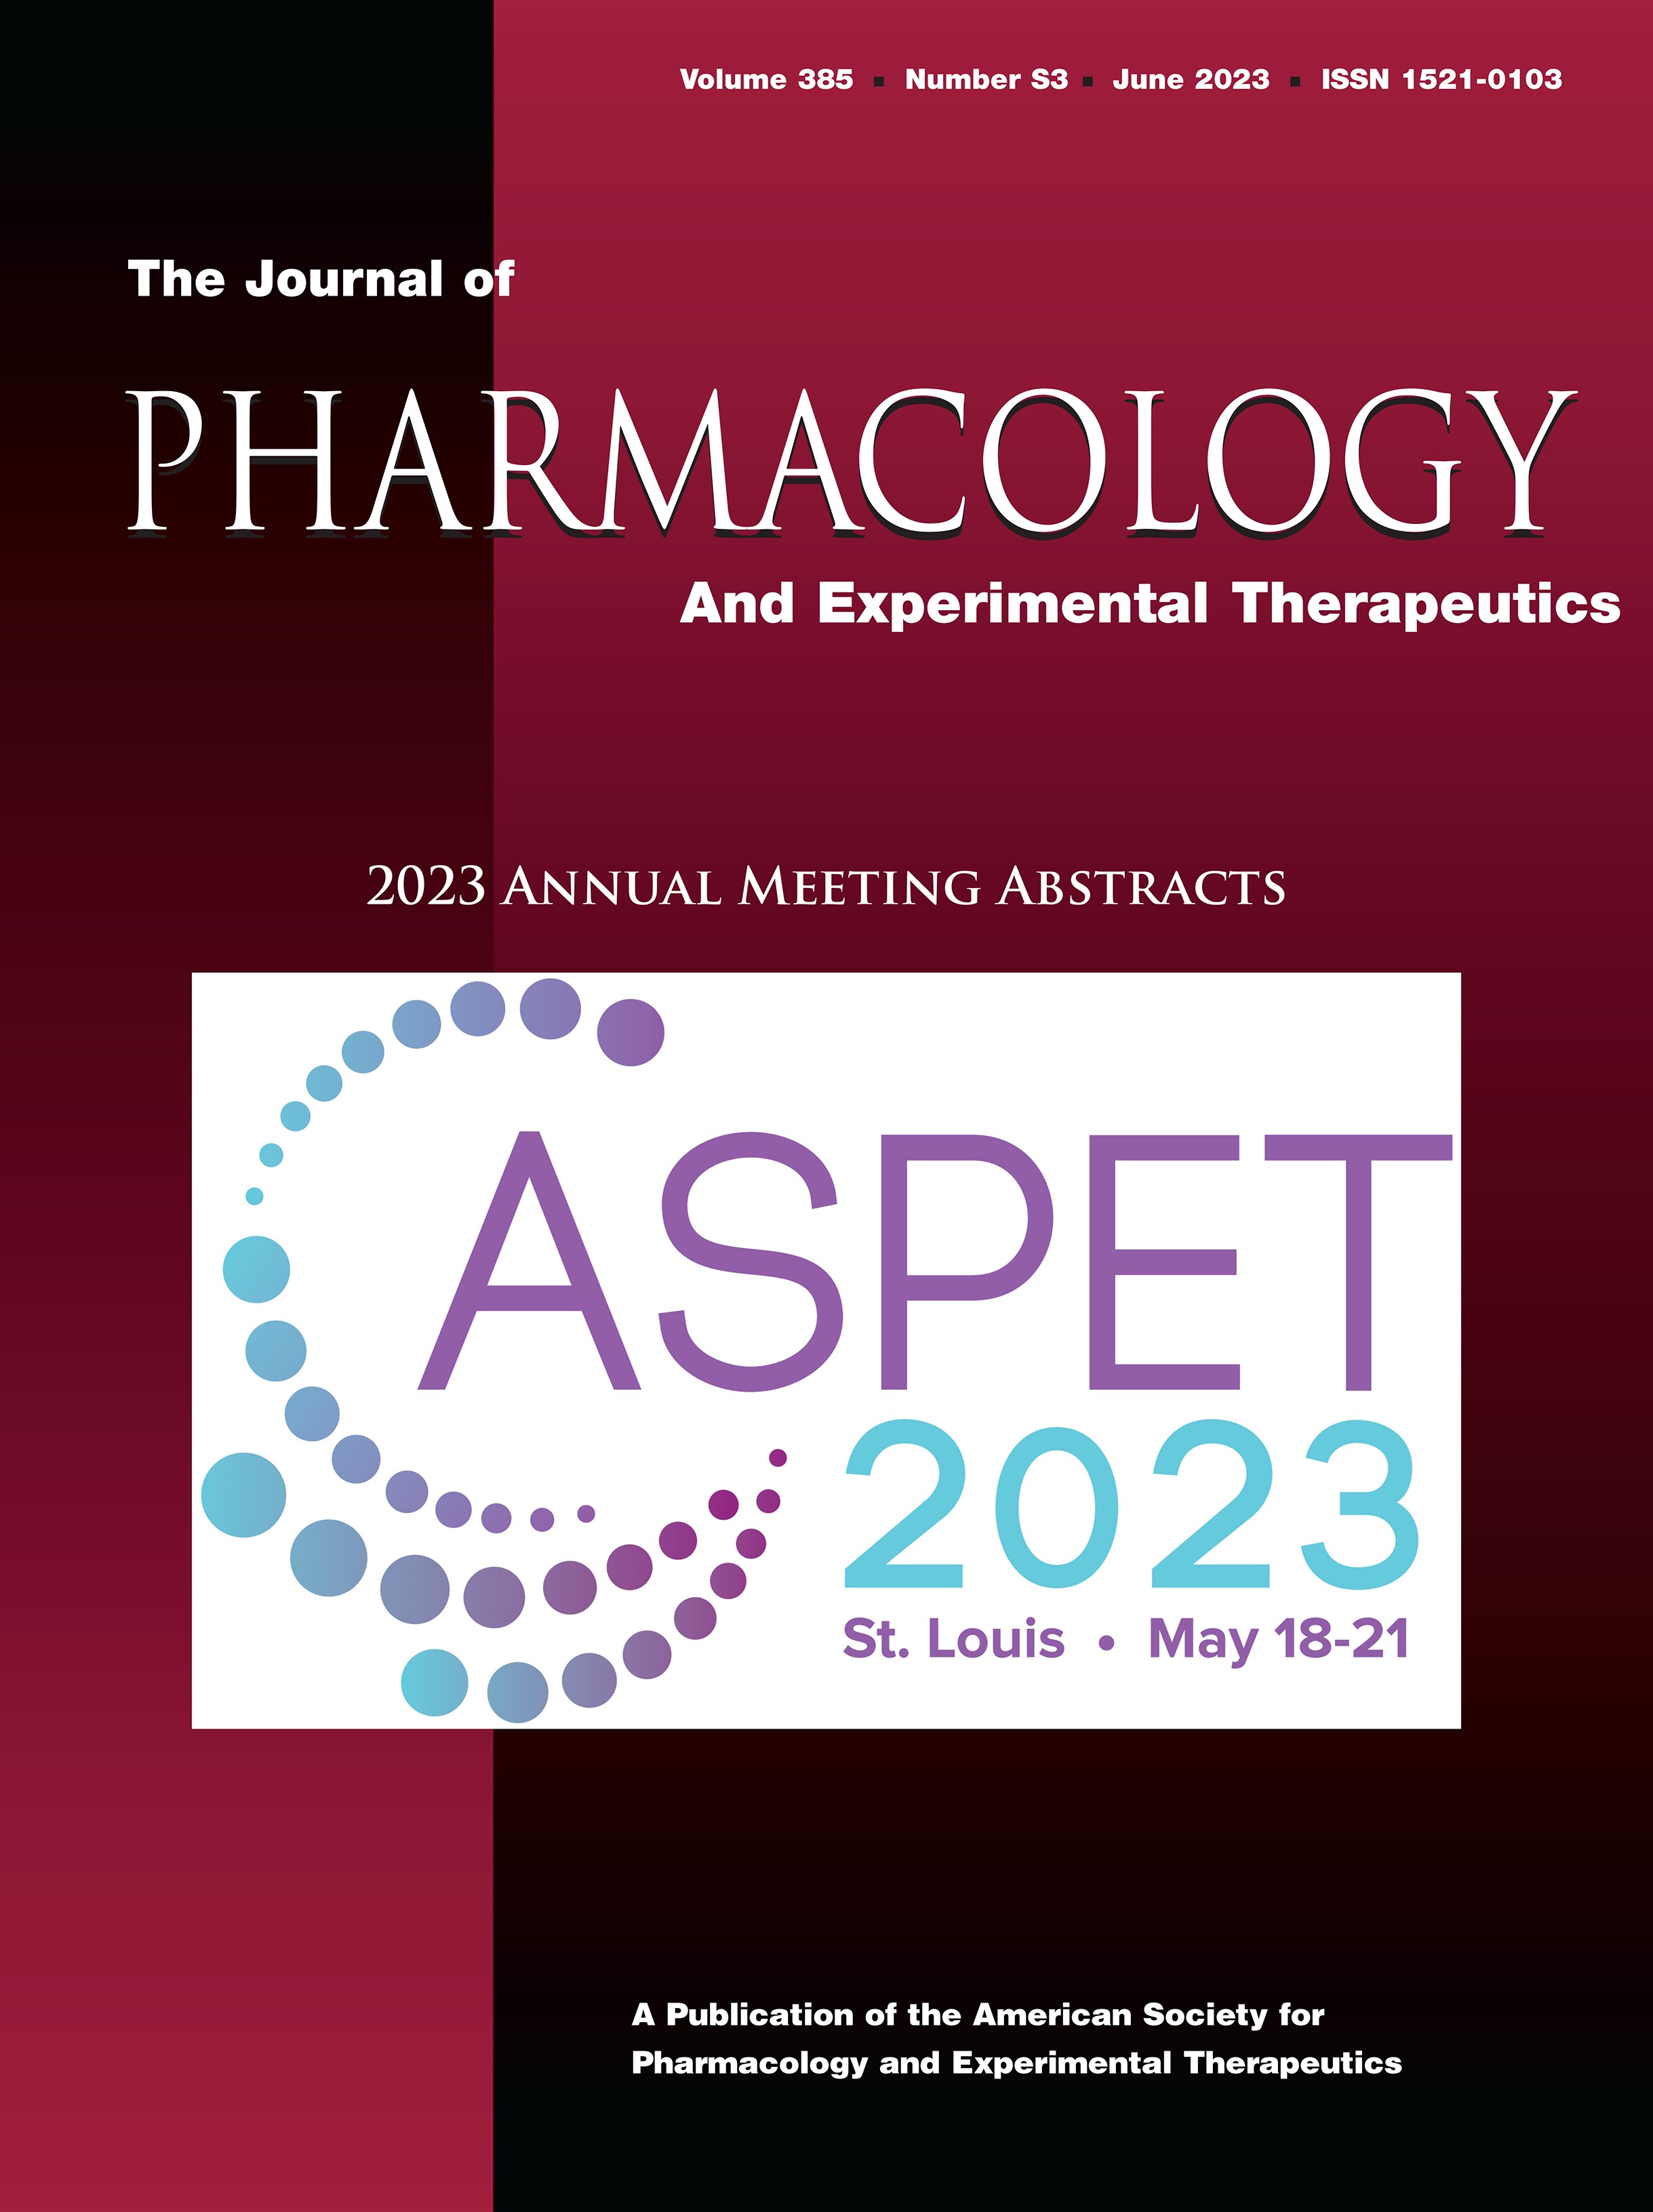 Ligand and G Protein Selectivity in Kappa Opioid Receptor Revealed by Structural Pharmacology [ASPET 2023 Annual Meeting Abstract - Central Nervous System Pharmacology - Neuropharmacology]